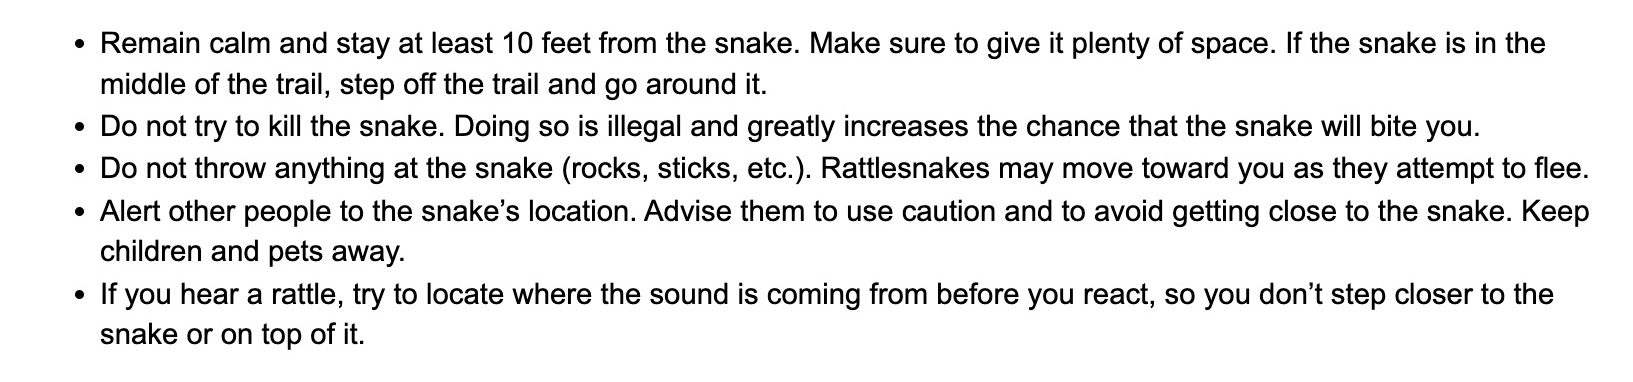 Tips for staying safe when encountering a rattlesnake.